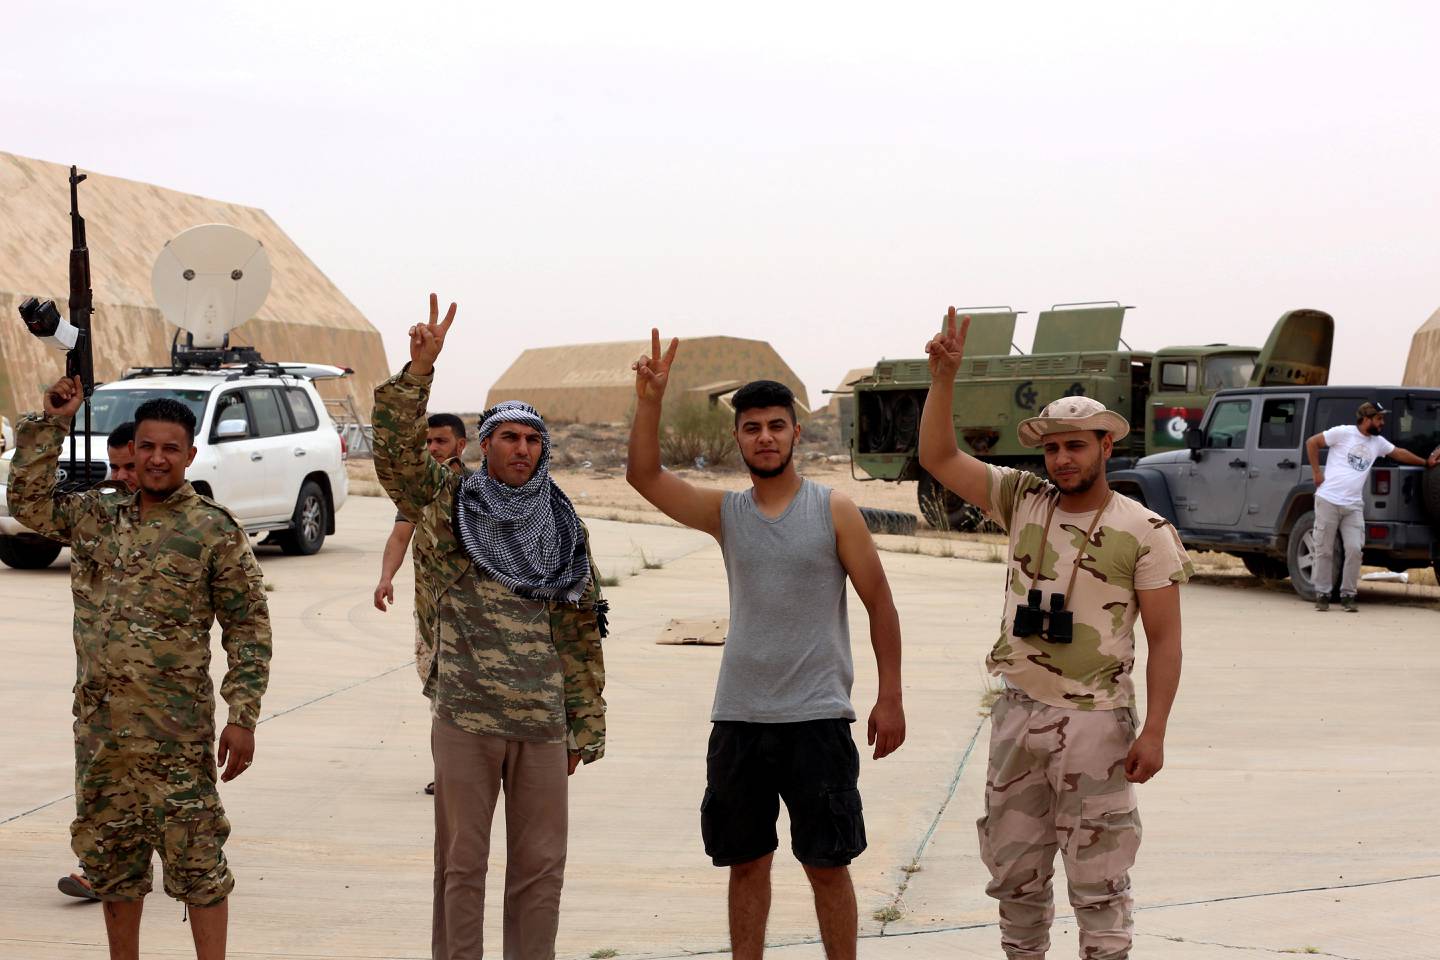 FILE PHOTO: Members of Libya's internationally recognised government flash victory signs after taking control of Watiya airbase, southwest of Tripoli, Libya May 18, 2020. REUTERS/Hazem Ahmed/File Photo